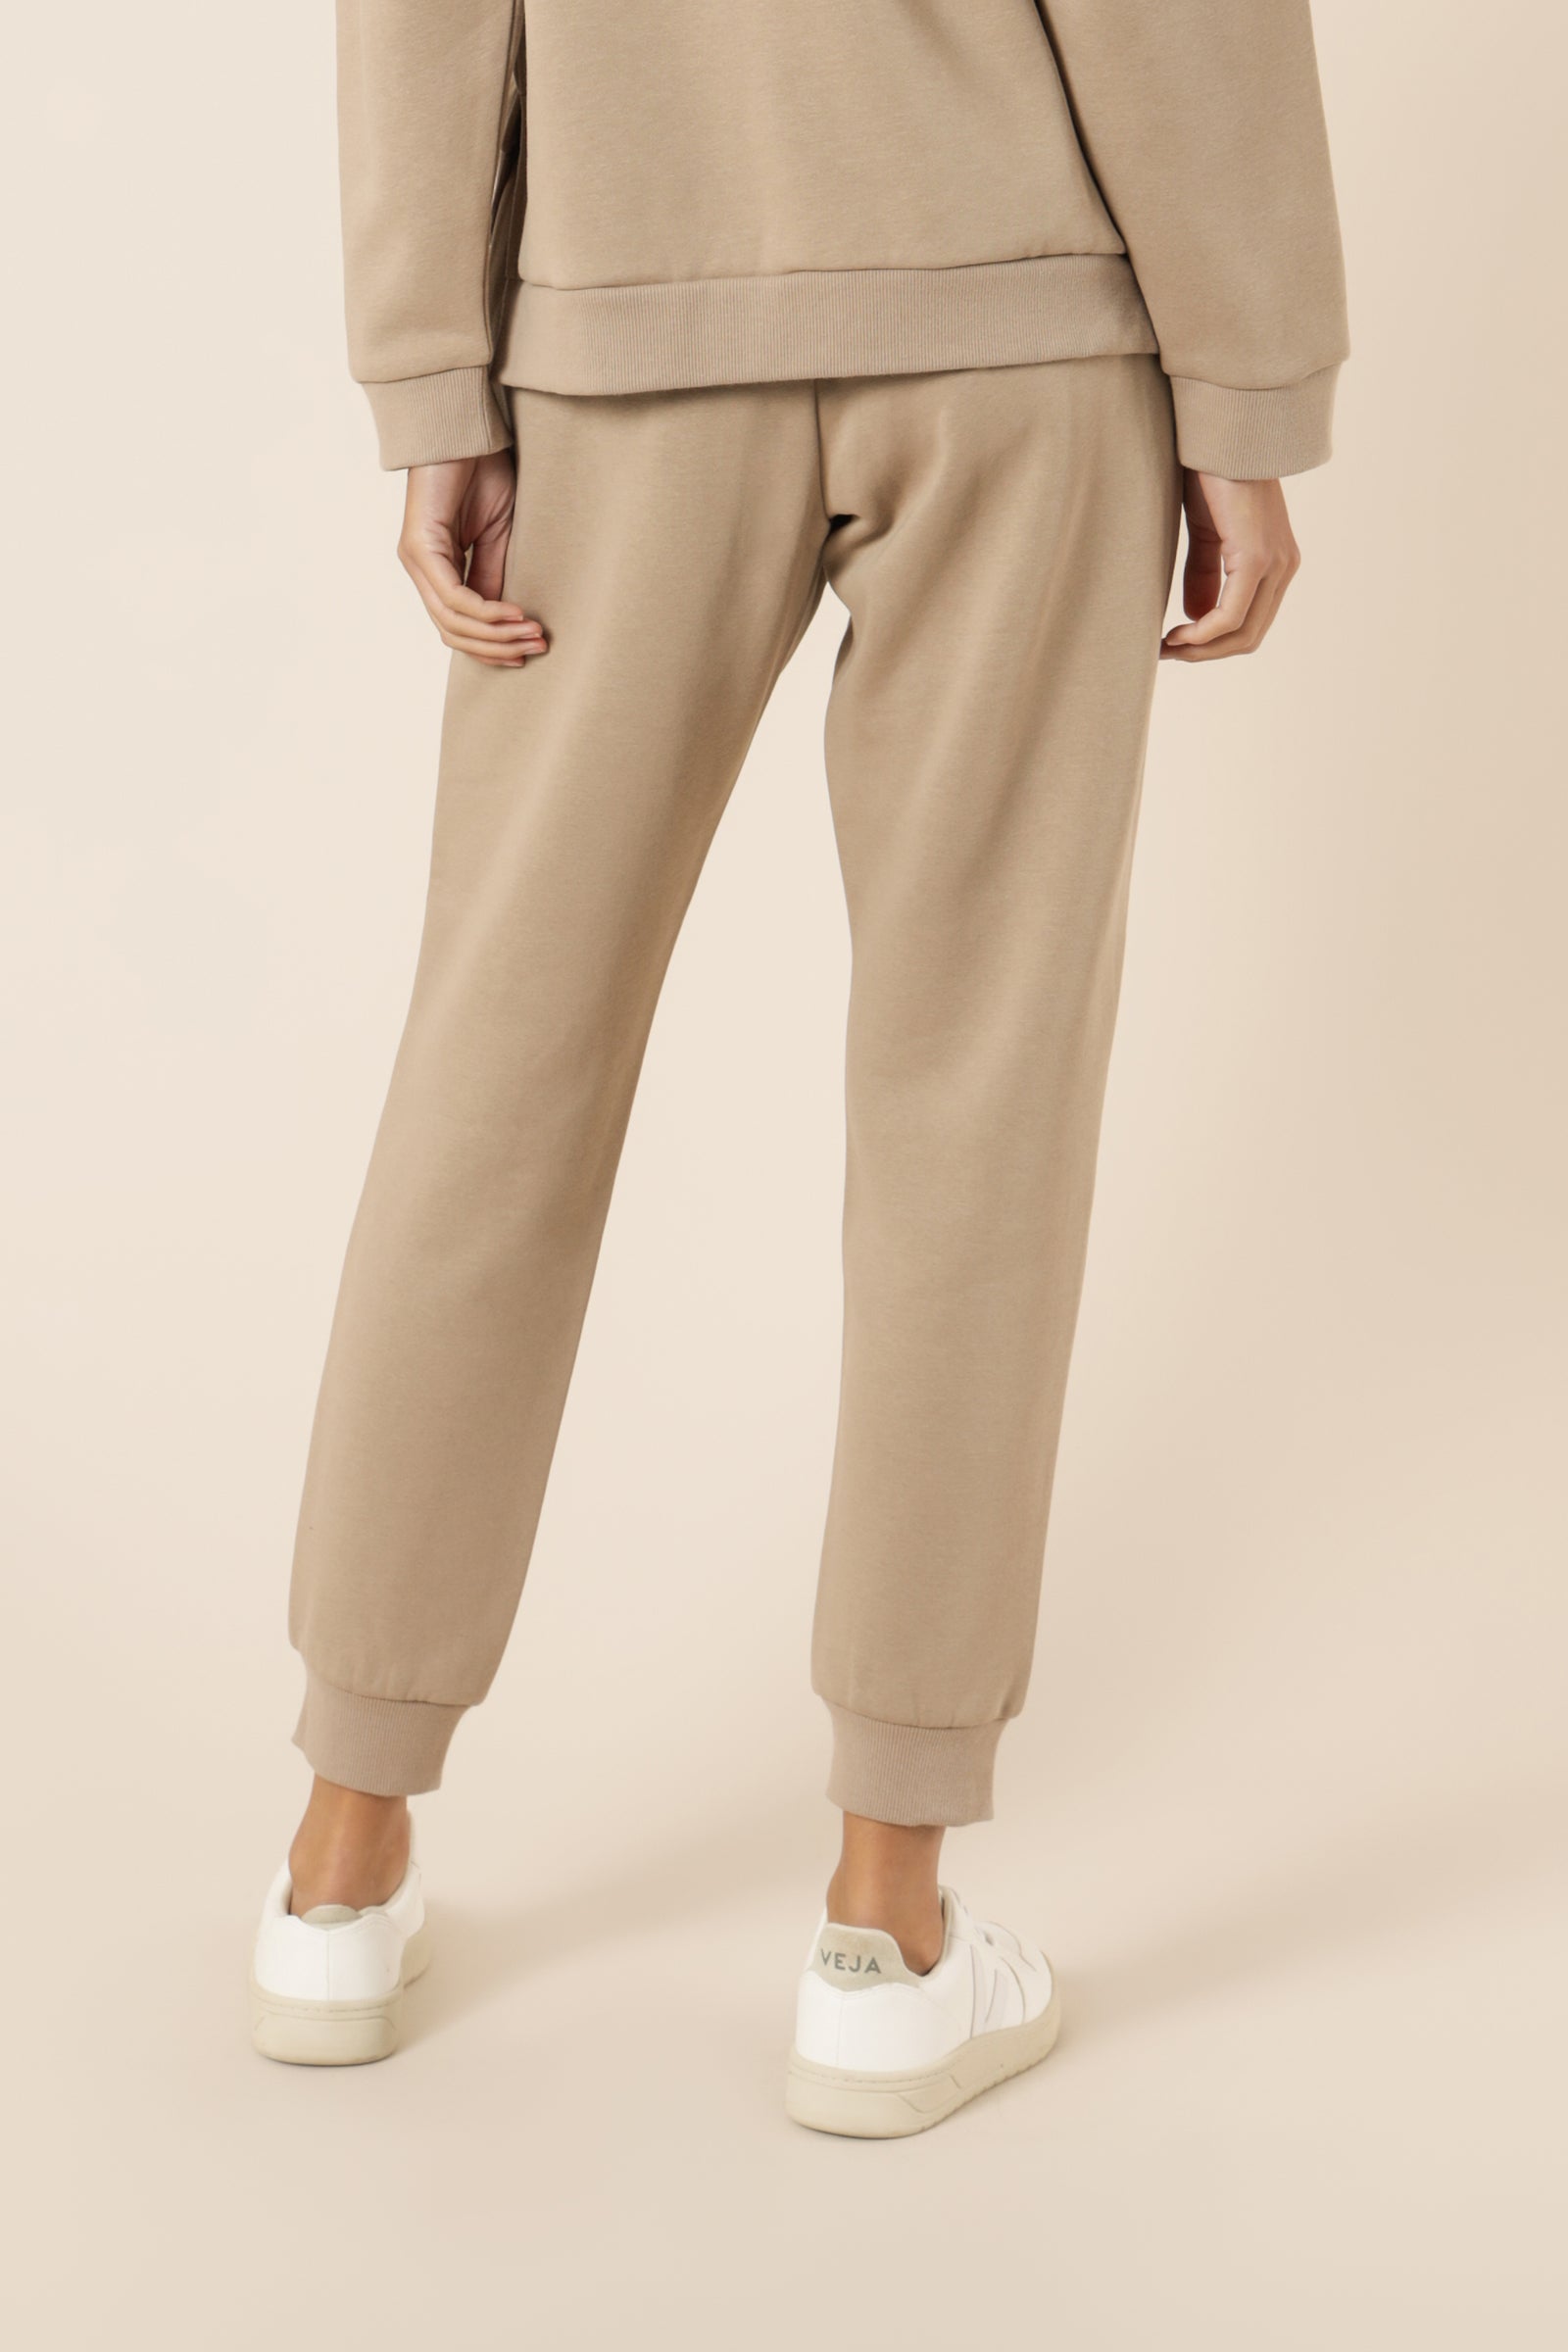 Nude Lucy carter classic trackpant mocha pants